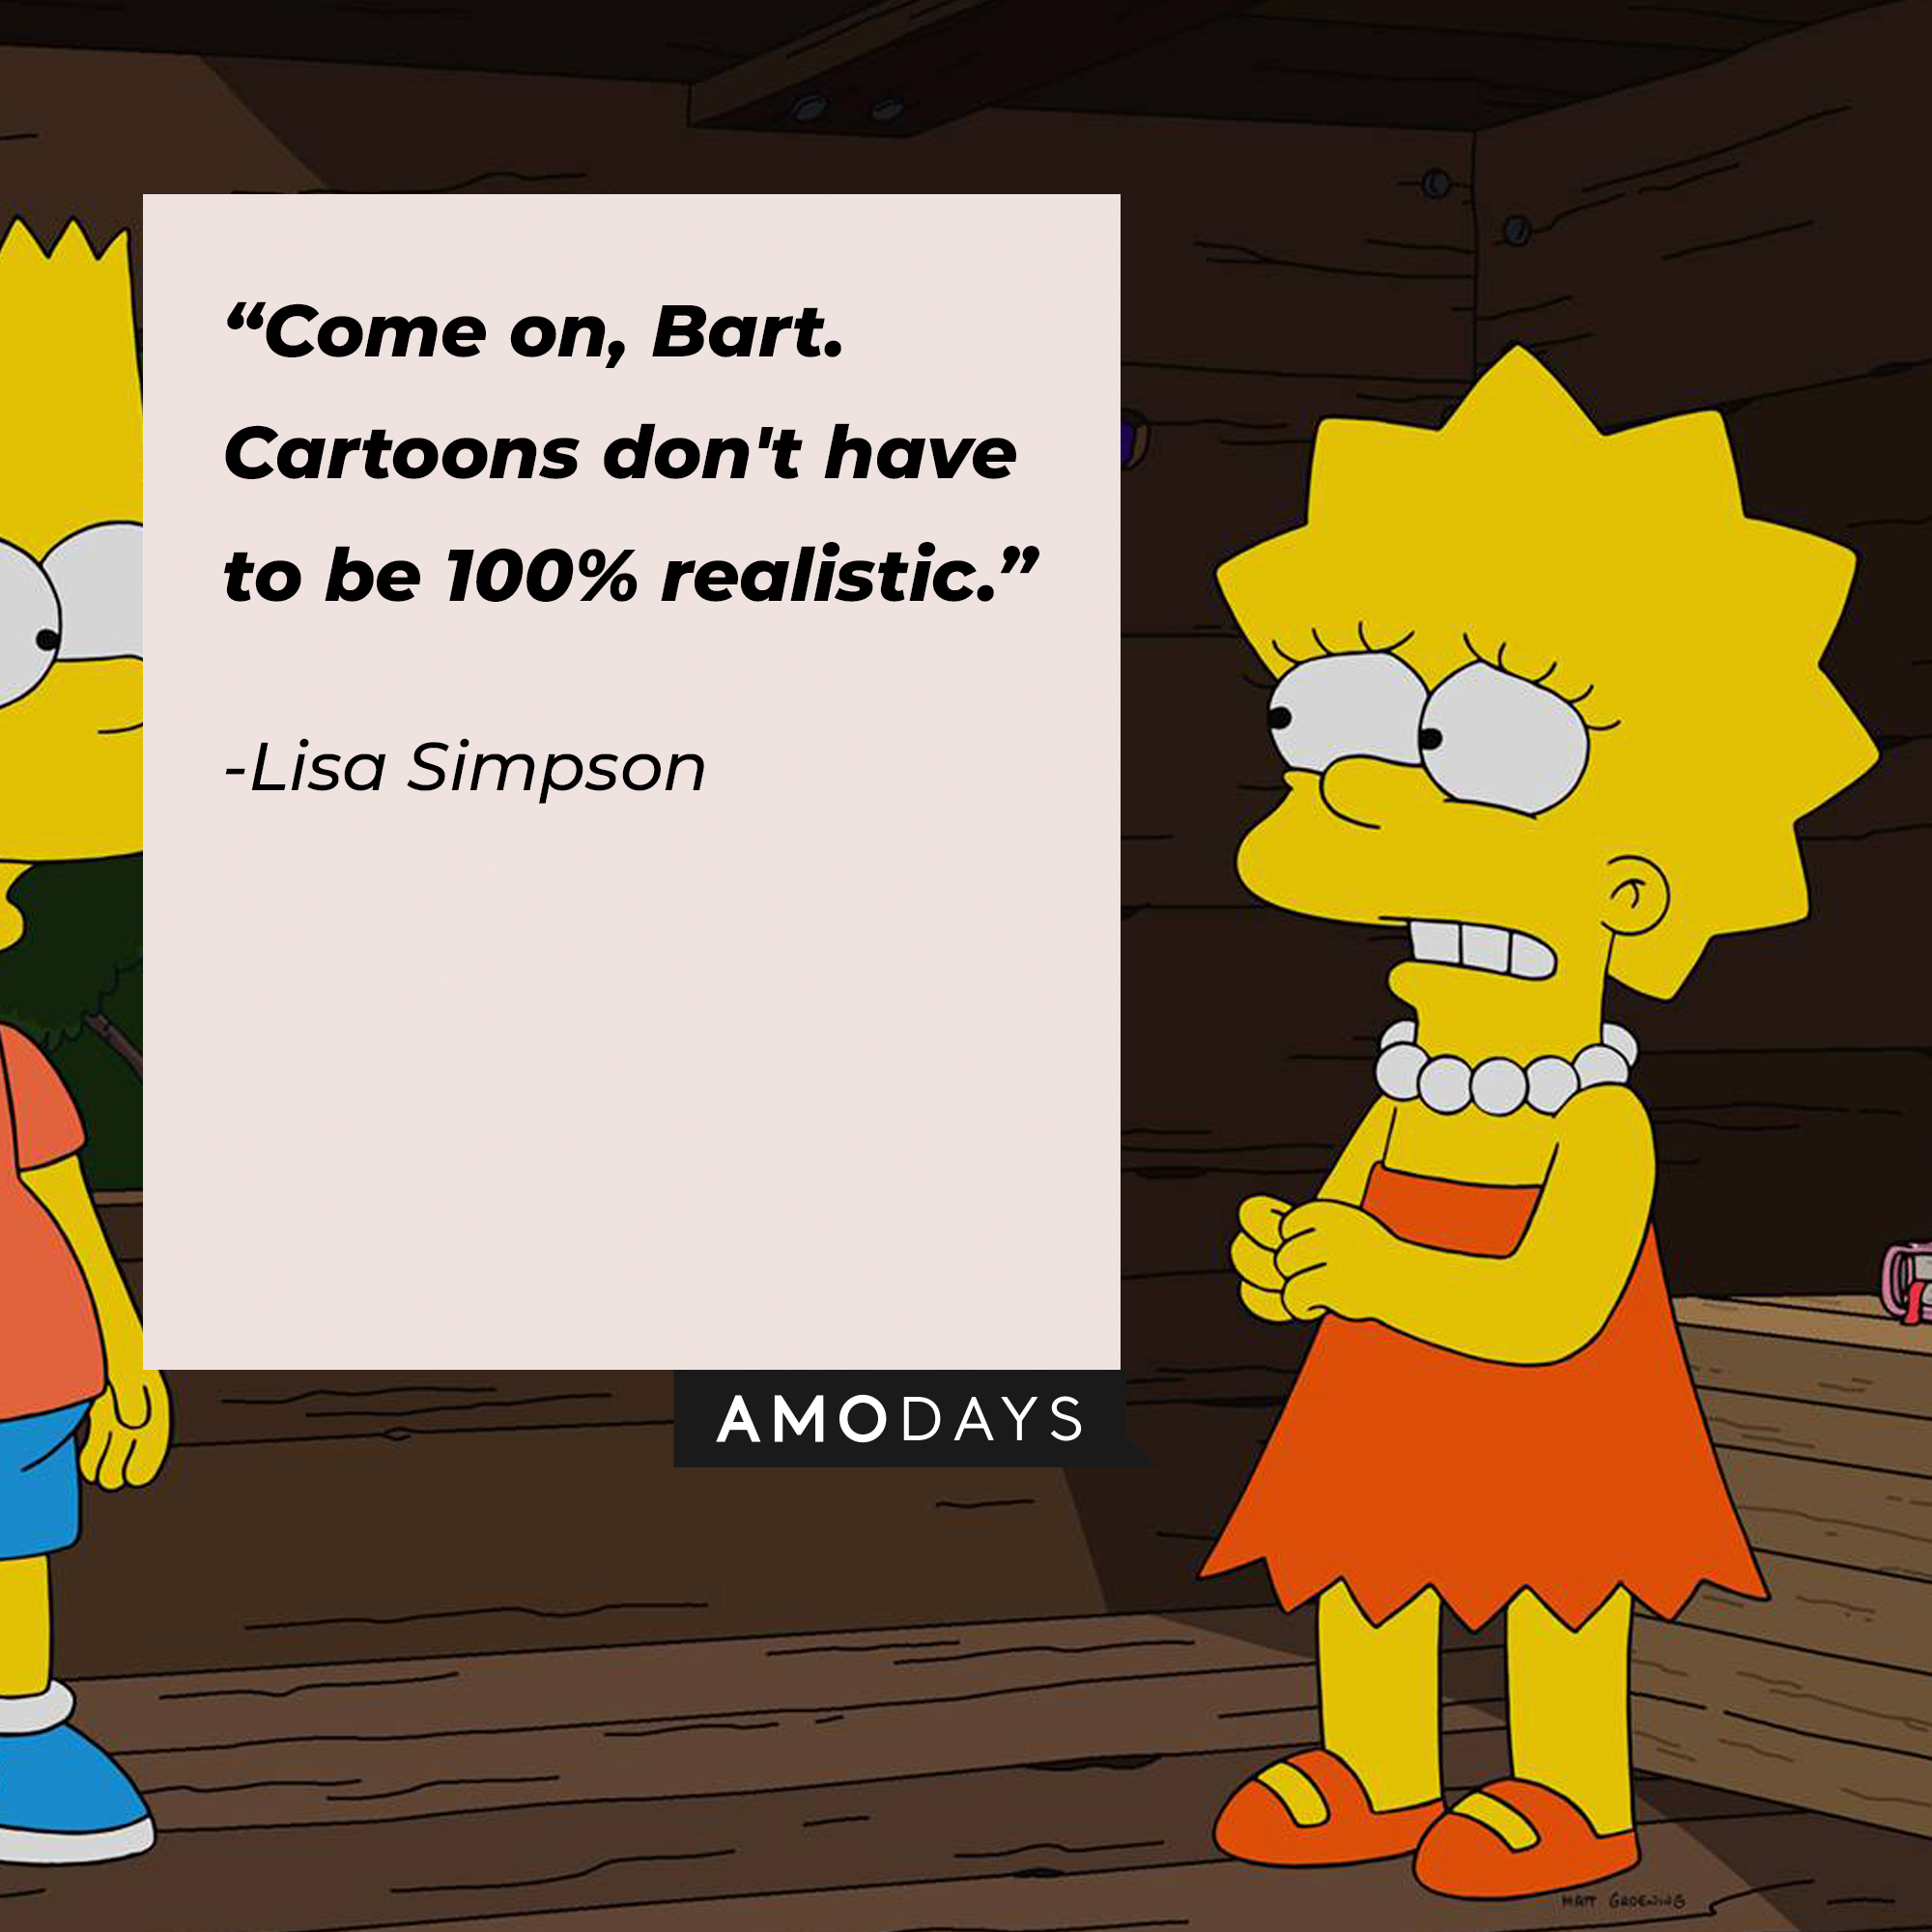 Lisa Simpson, with her quote: “Come on, Bart. Cartoons don't have to be 100% realistic.." | Source: facebook.com/TheSimpsons